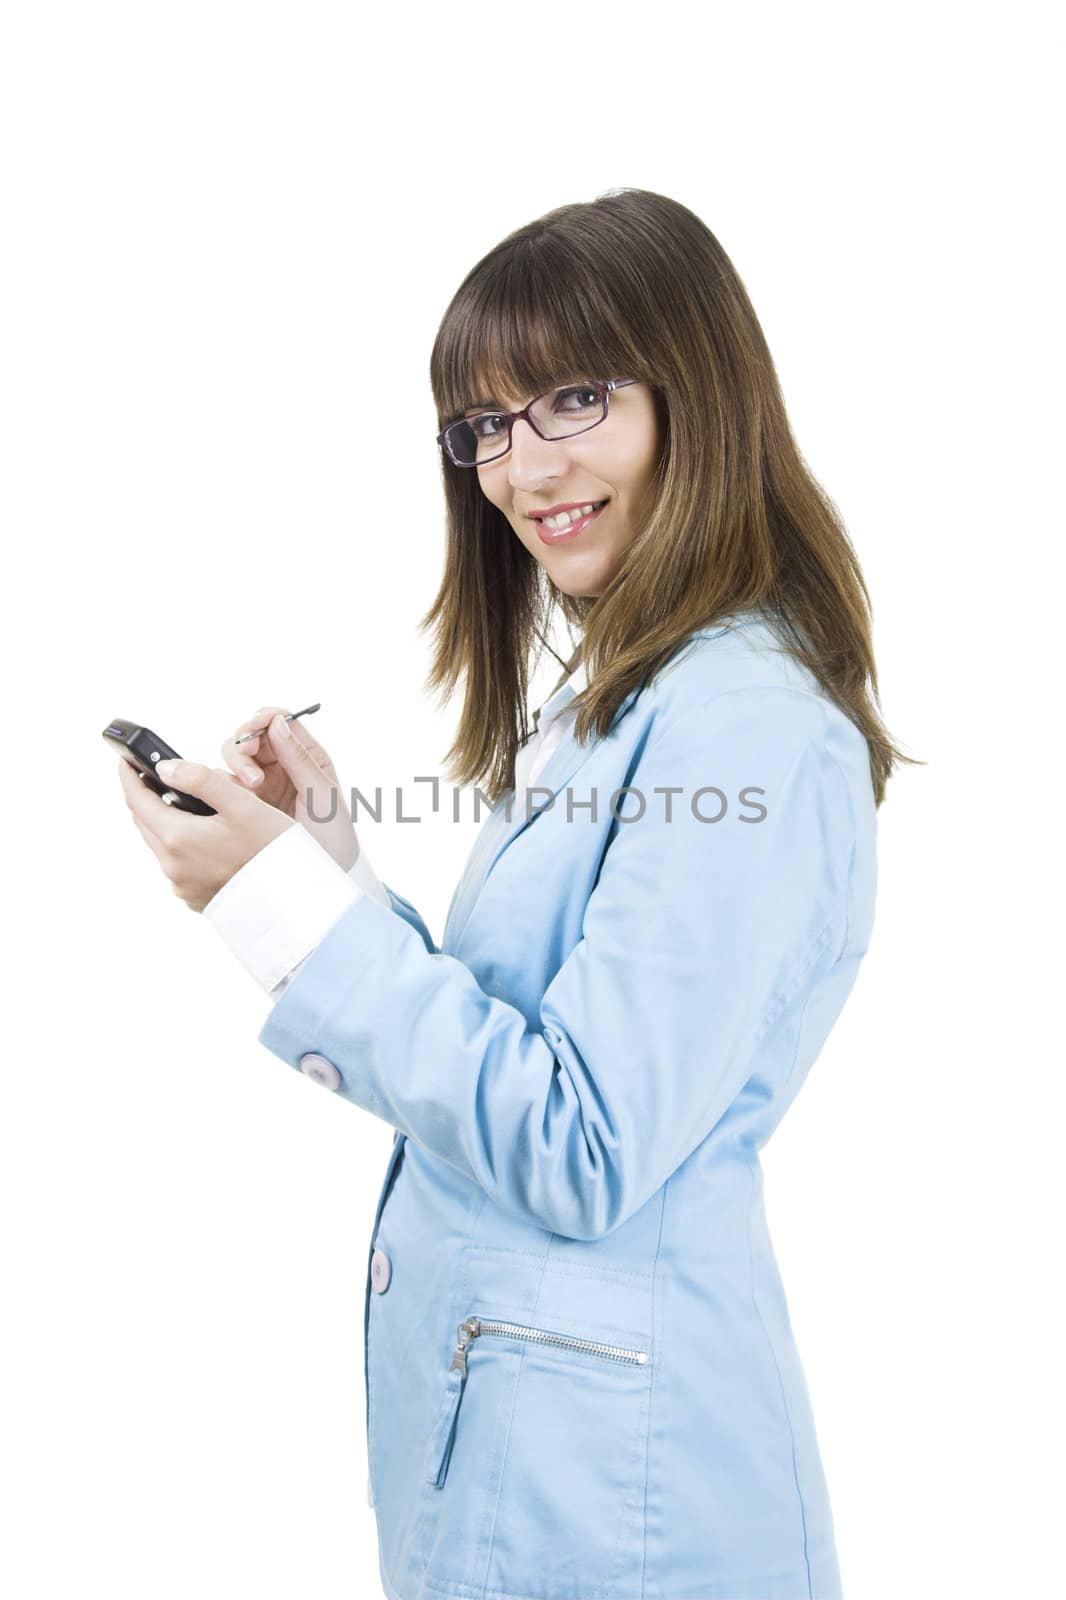 Beautiful businesswoman holding a PDA over a white background

